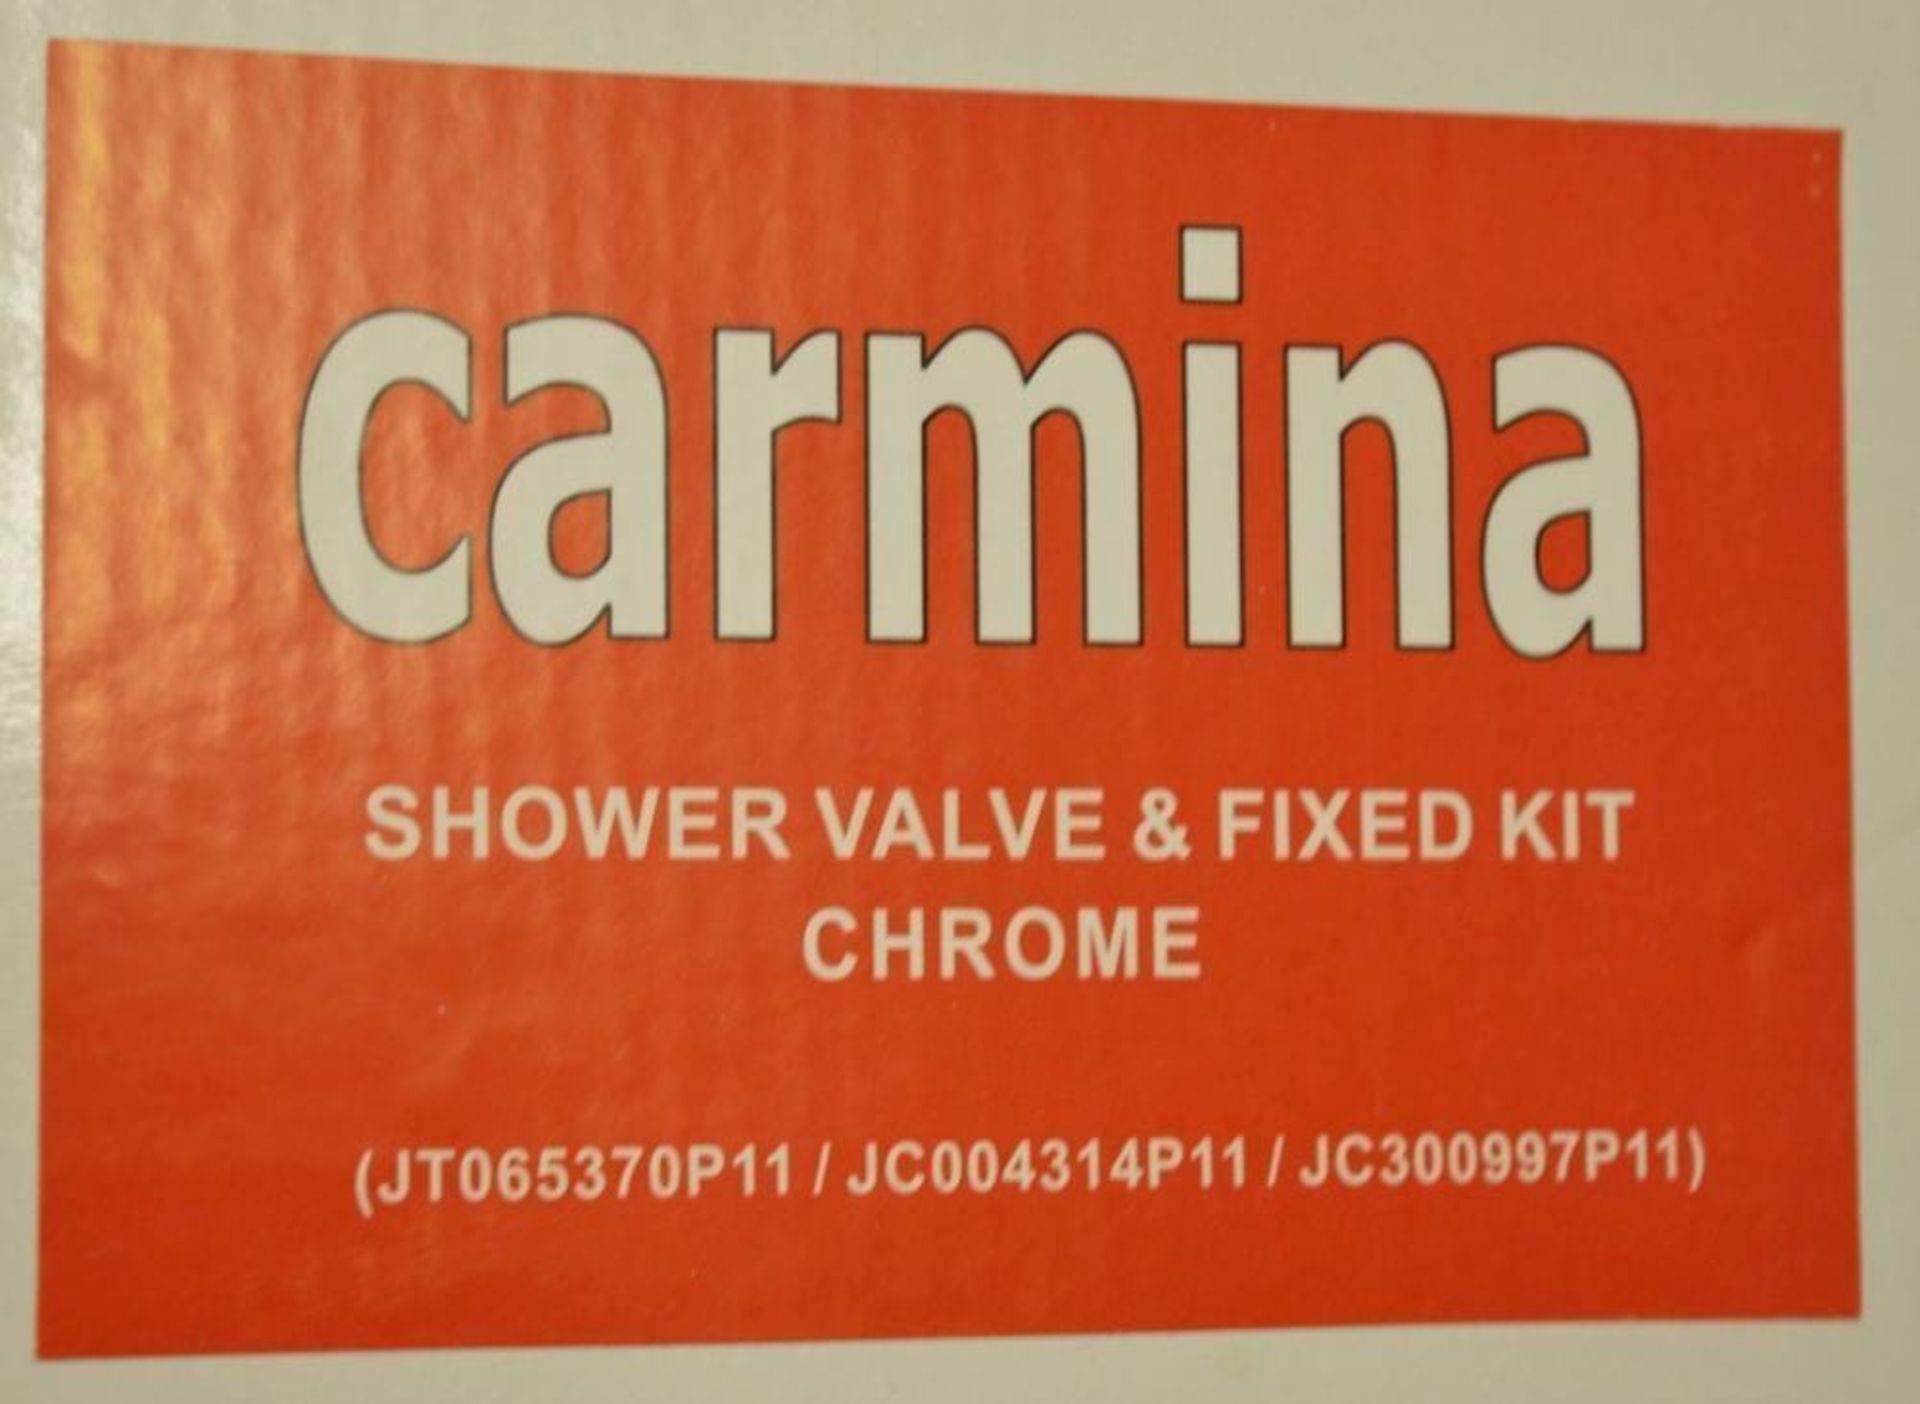 1 x Carmina Shower Valve Kit - Contains Chrome Shower Head, Fixed Arm and Manual Control - Brass Con - Image 8 of 10